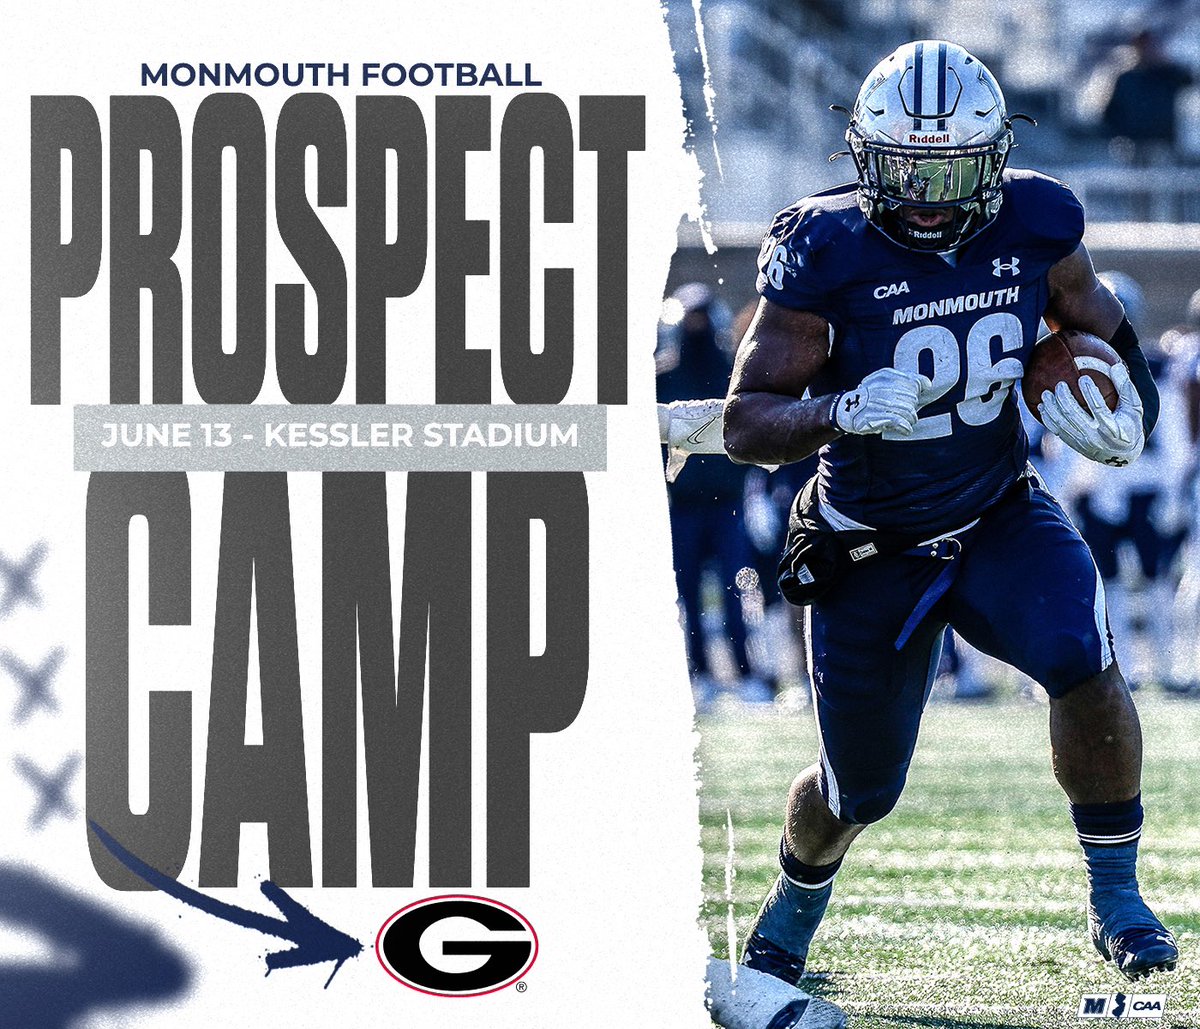 Monmouth Hawks 🤝 Georgia Bulldogs Join us for our June 13 Prospect Camp to compete in front of the top coaches in the country MonmouthFootballCamp.com